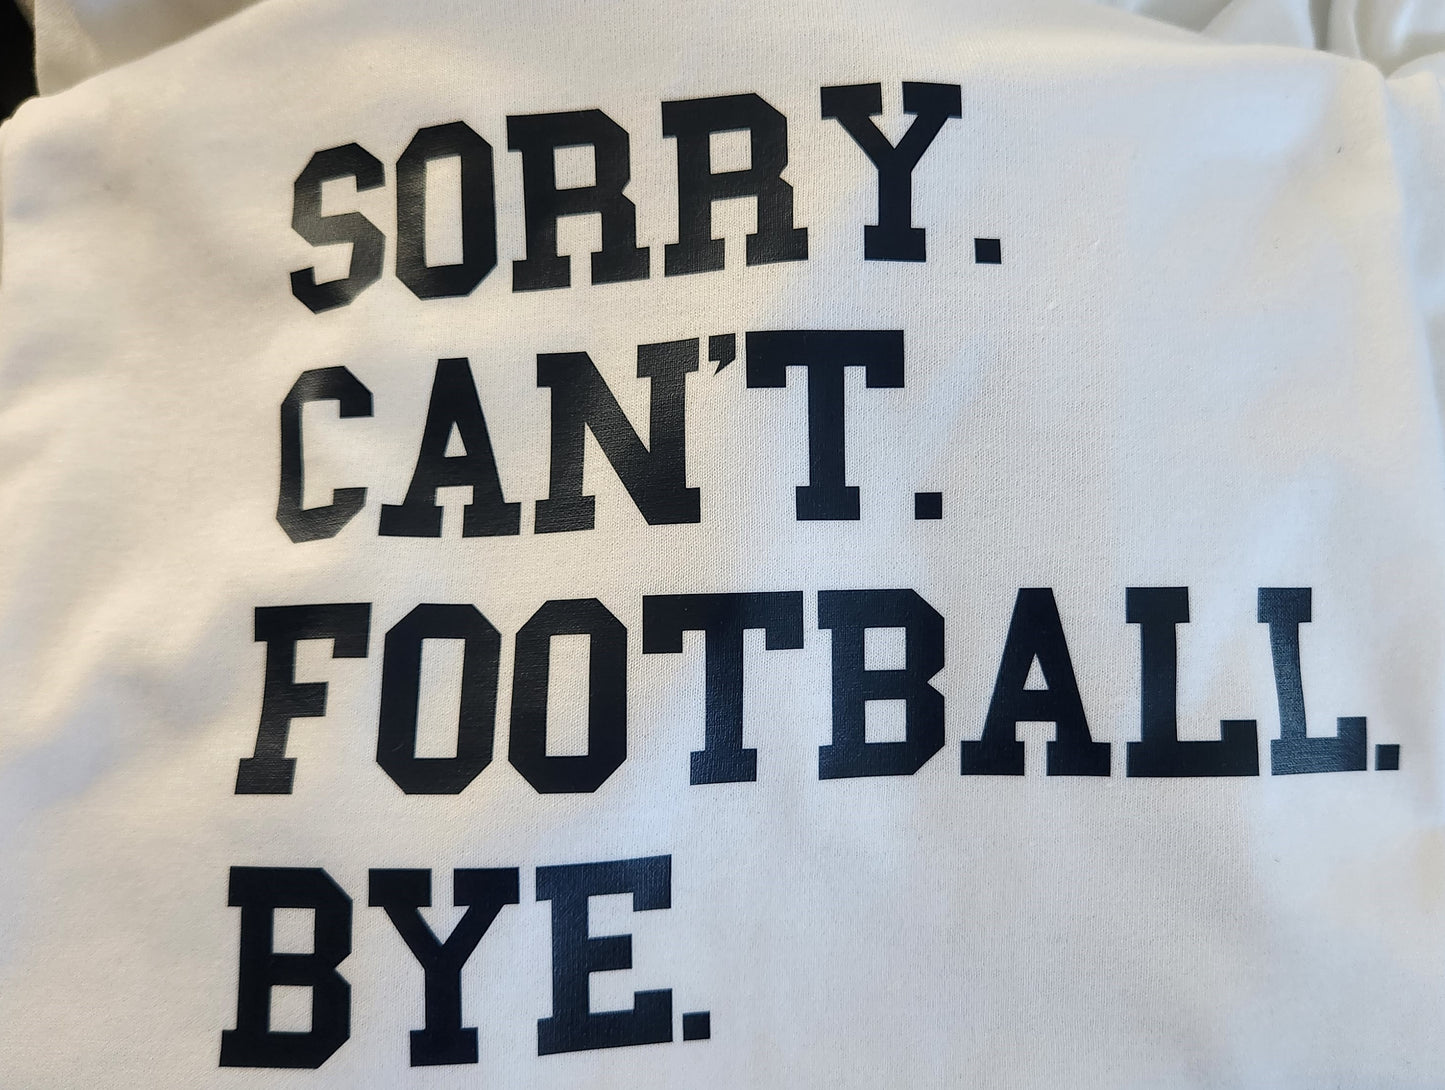 Sorry. Can't. Football t-shirt